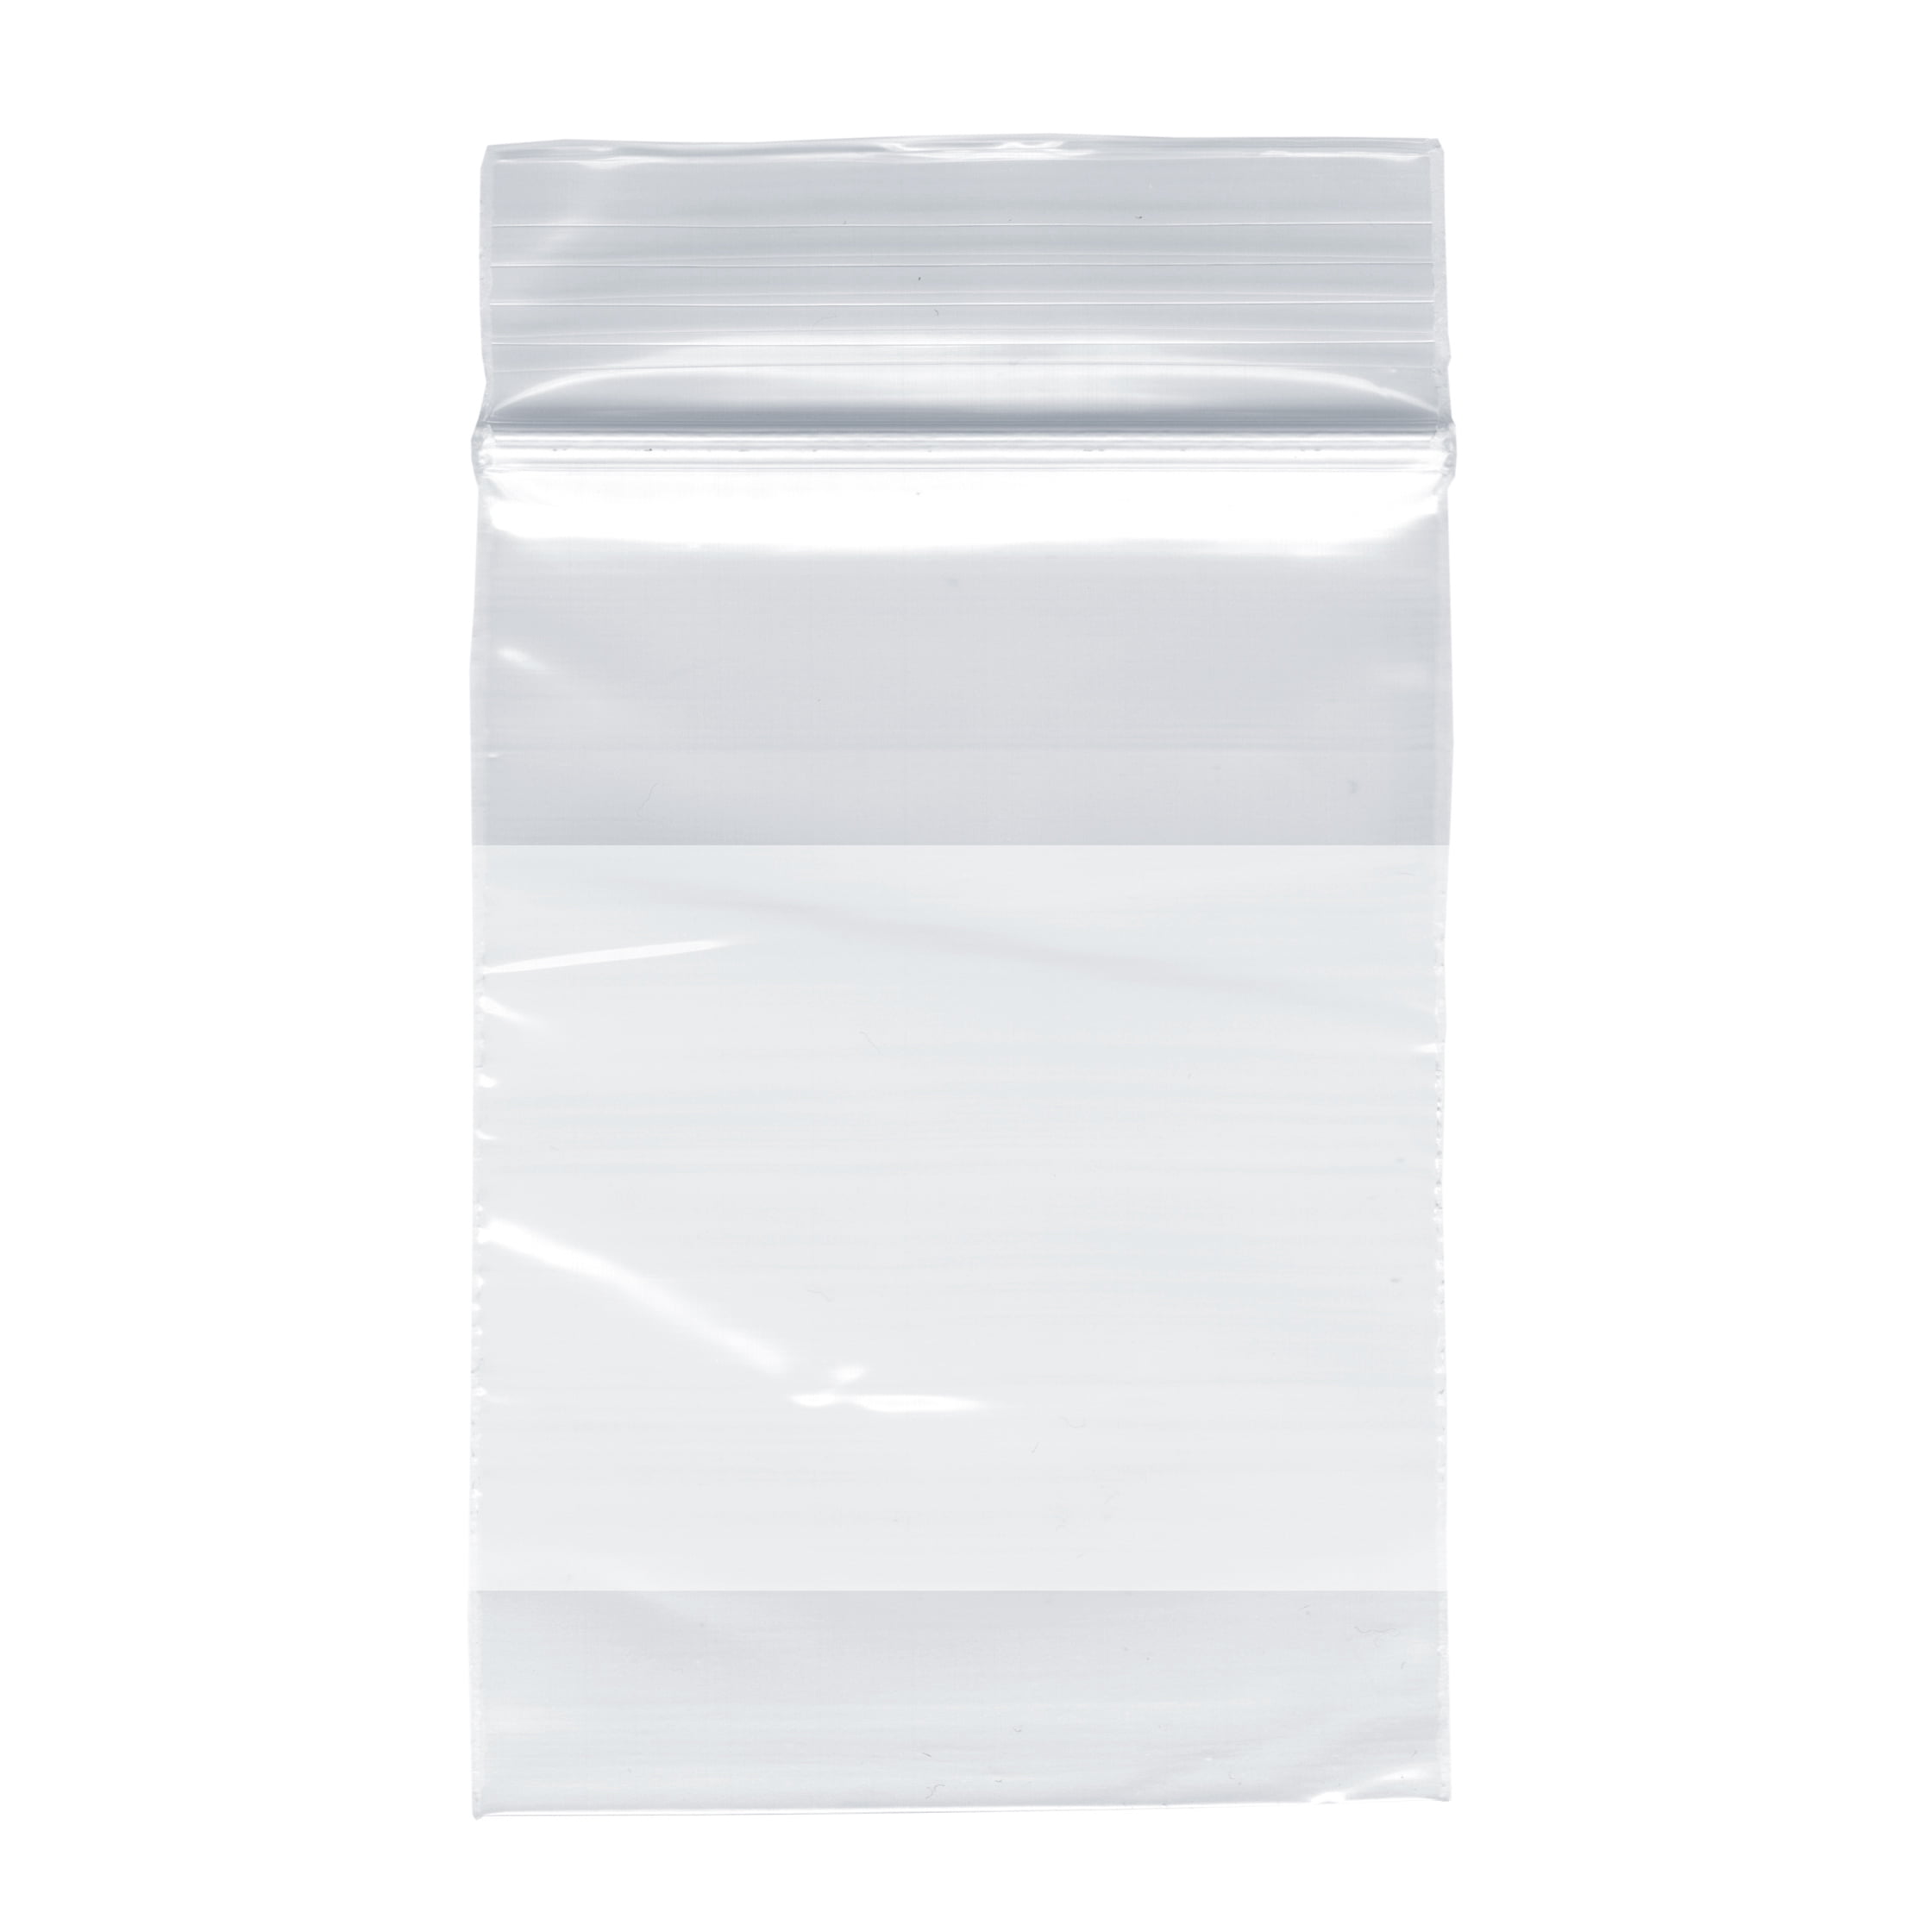 2 Mil Clear Reclosable Plastic Poly Bags 12" x 15" with White Block 2000 Packs 